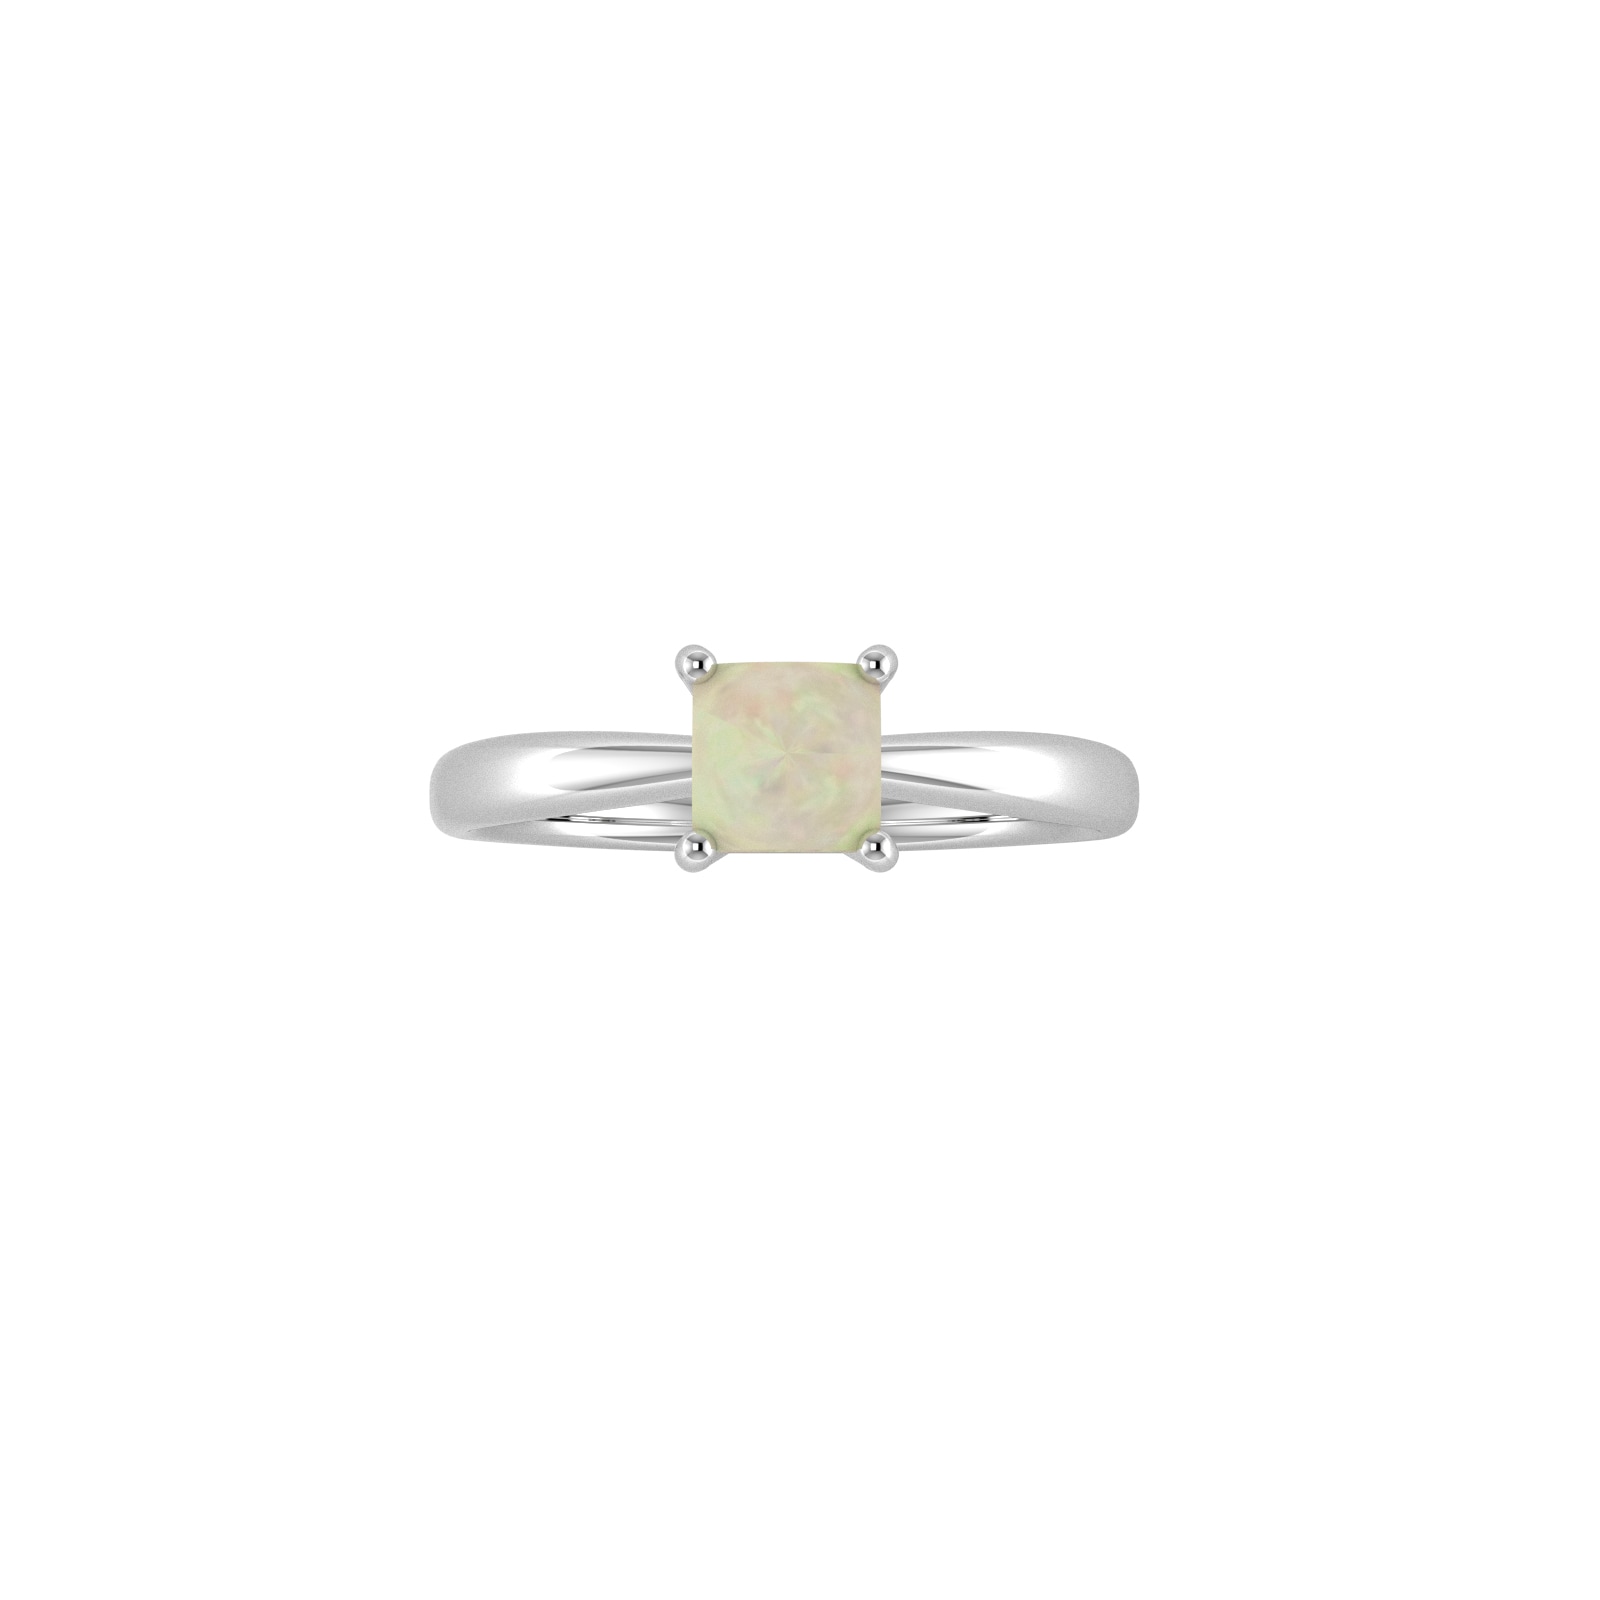 9ct White Gold 4 Claw Square Opal 5mm x 5mm Ring- Ring Size O